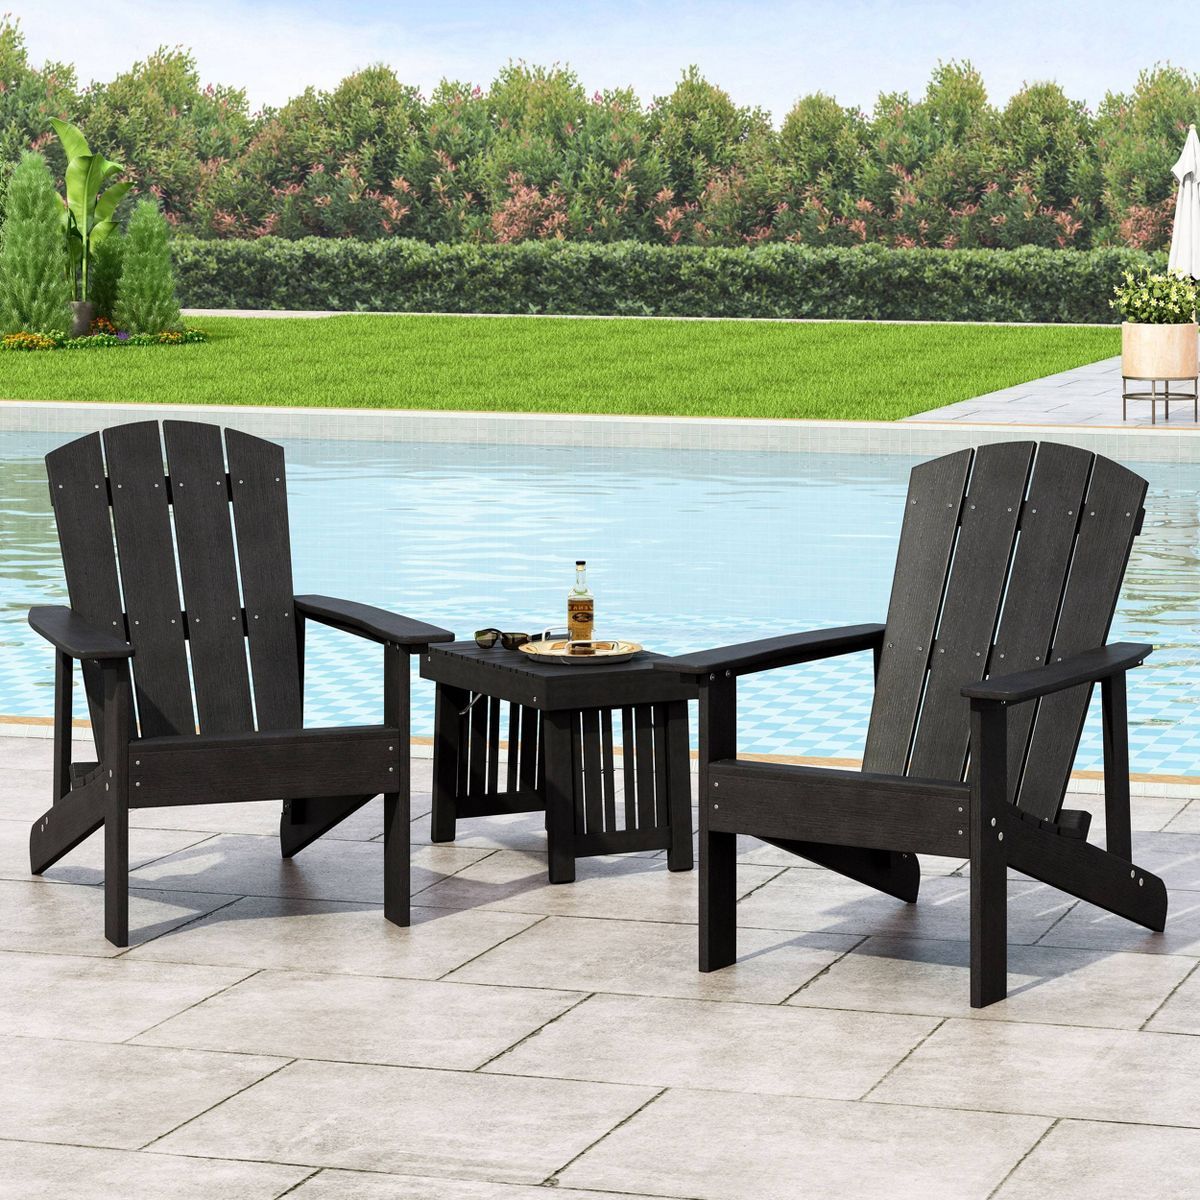 2pk Culver Outdoor Adirondack Chairs - Christopher Knight Home | Target